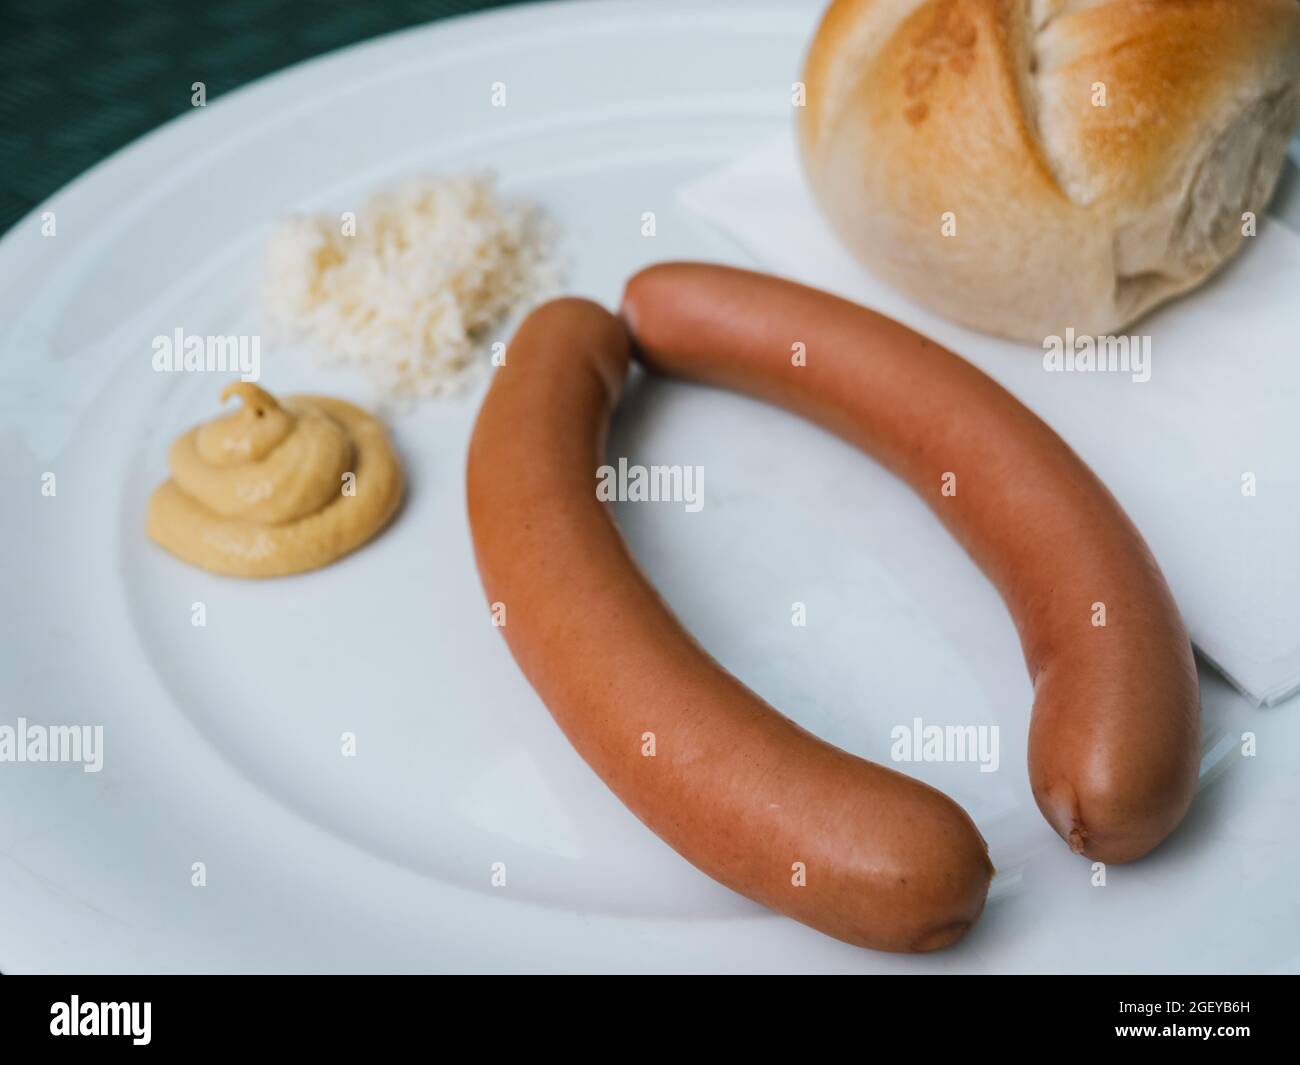 Frankfurter, Wiener or Vienna Sausage with Mustard, Horseradish and a Kaiser Roll Close Up Stock Photo